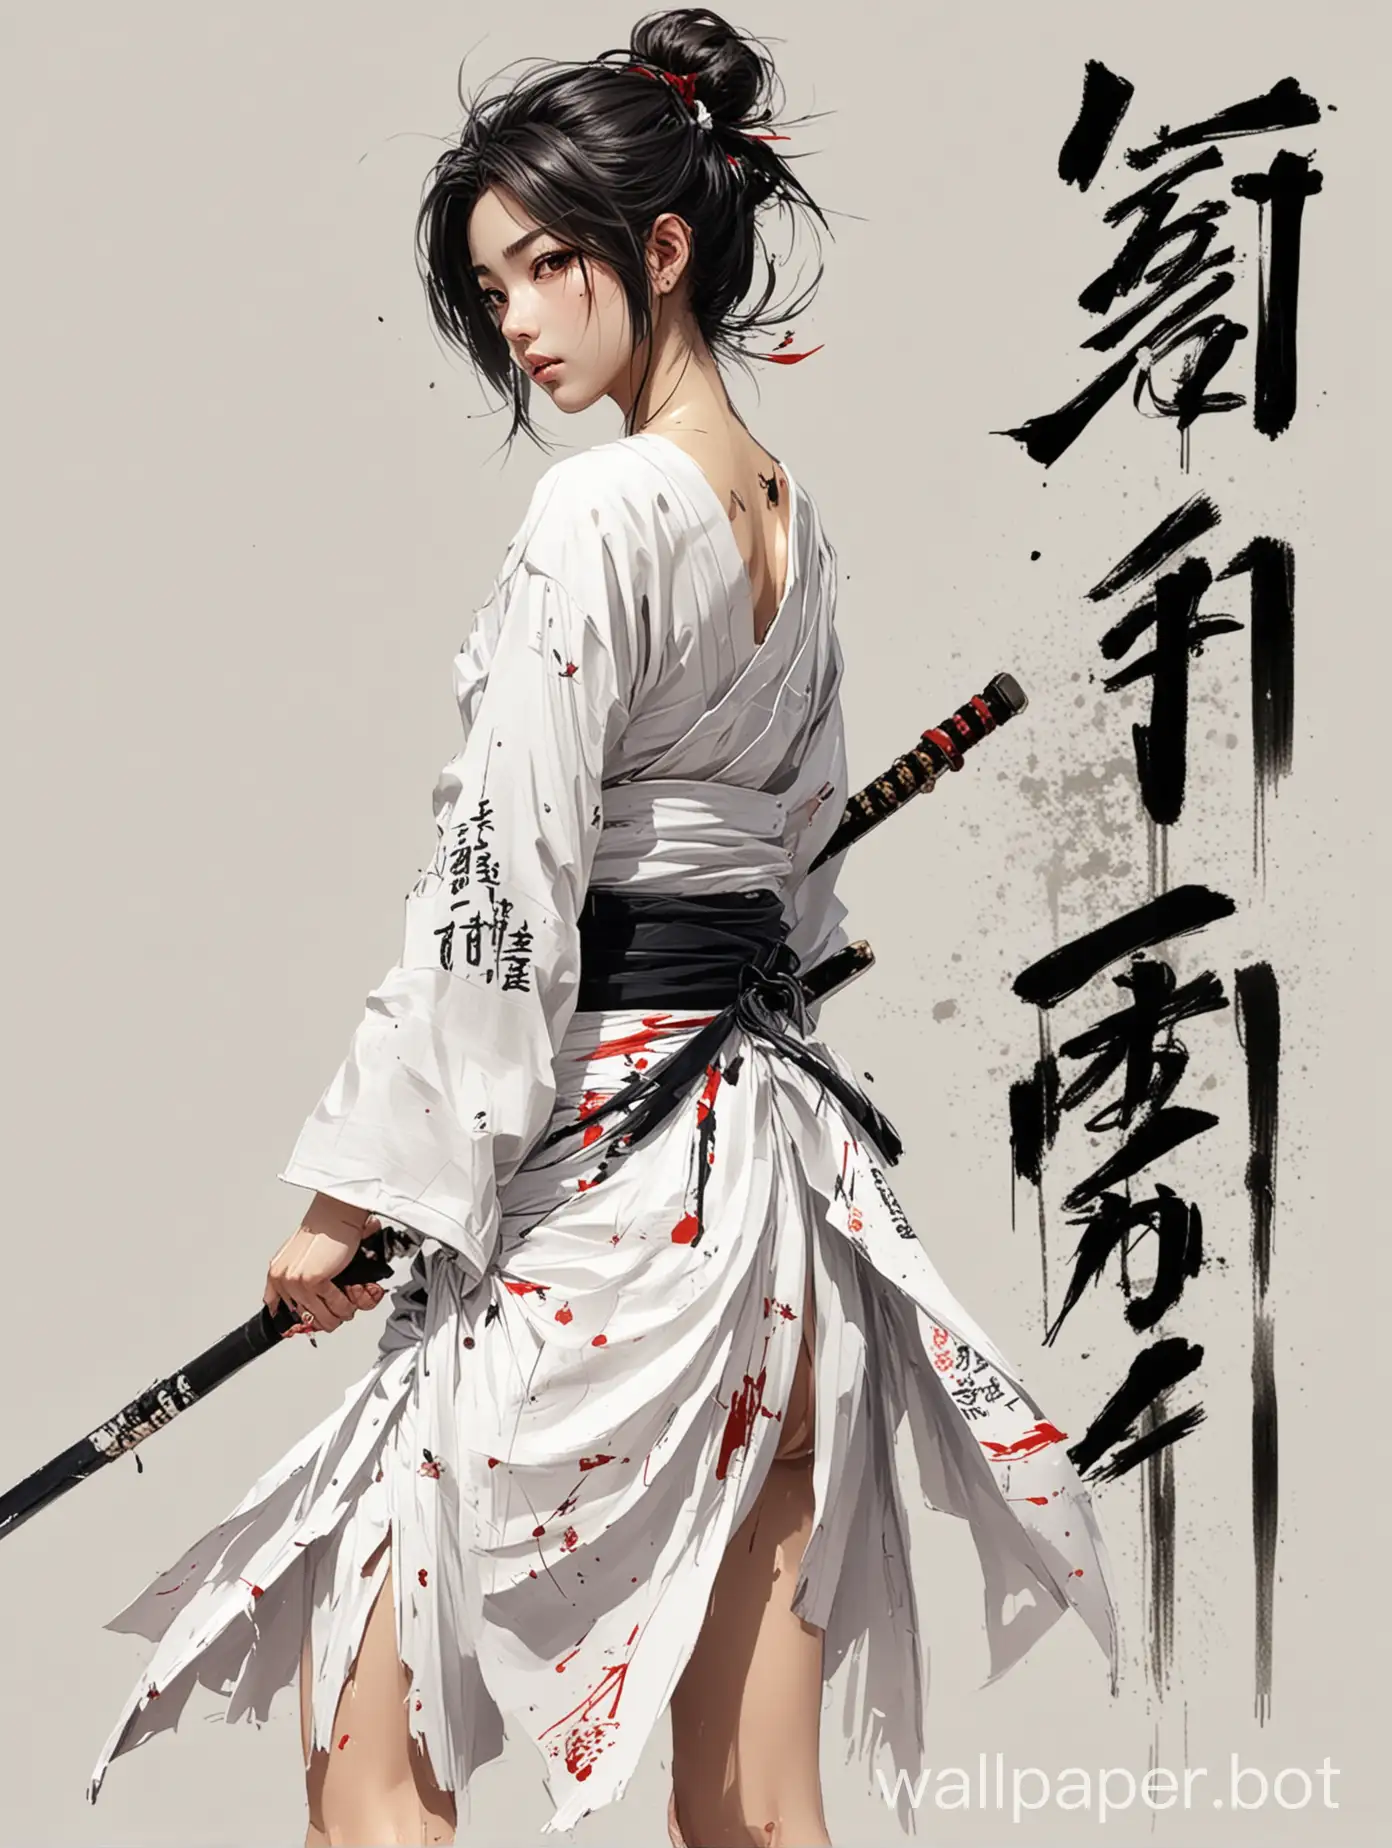 cool japan girl, white dress, white background,Turn your body to the left, anime In the story,samurai,Sketching styles, japan words in front,,a few black strokes with a brush behind the body,Broken brushstrokes,look folow body,wallpaper for 2 monitors